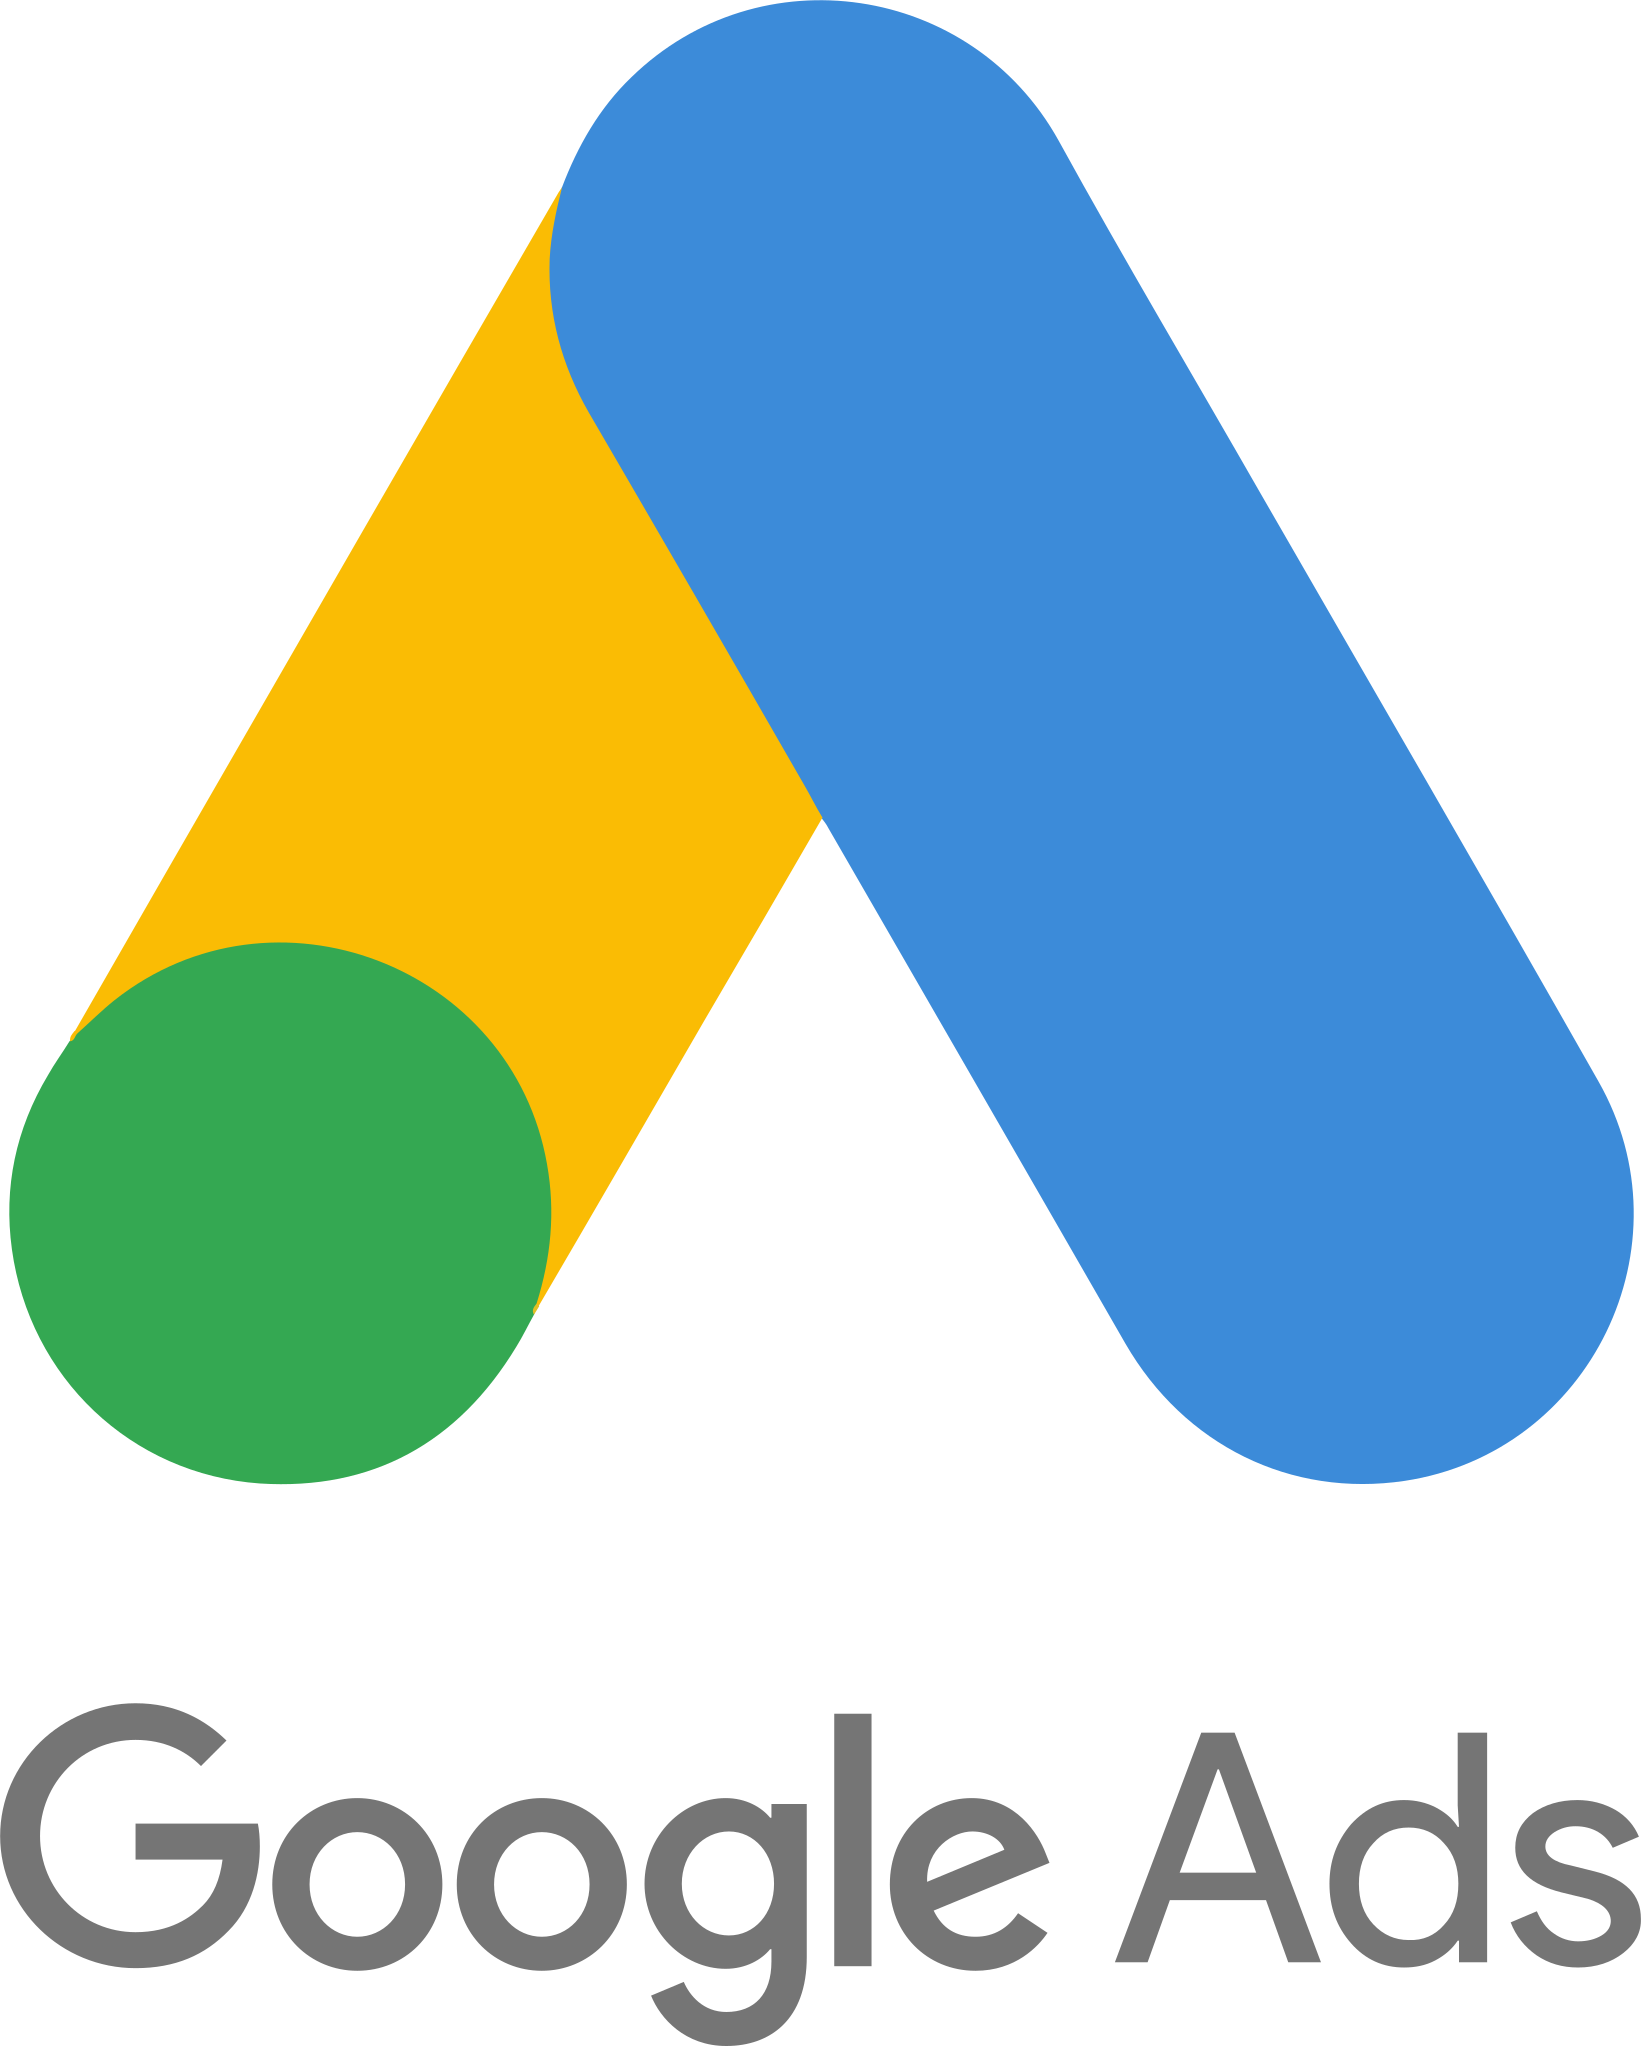 Googleadspic - DIT's Adwords Pay Per Click (PPC) Services